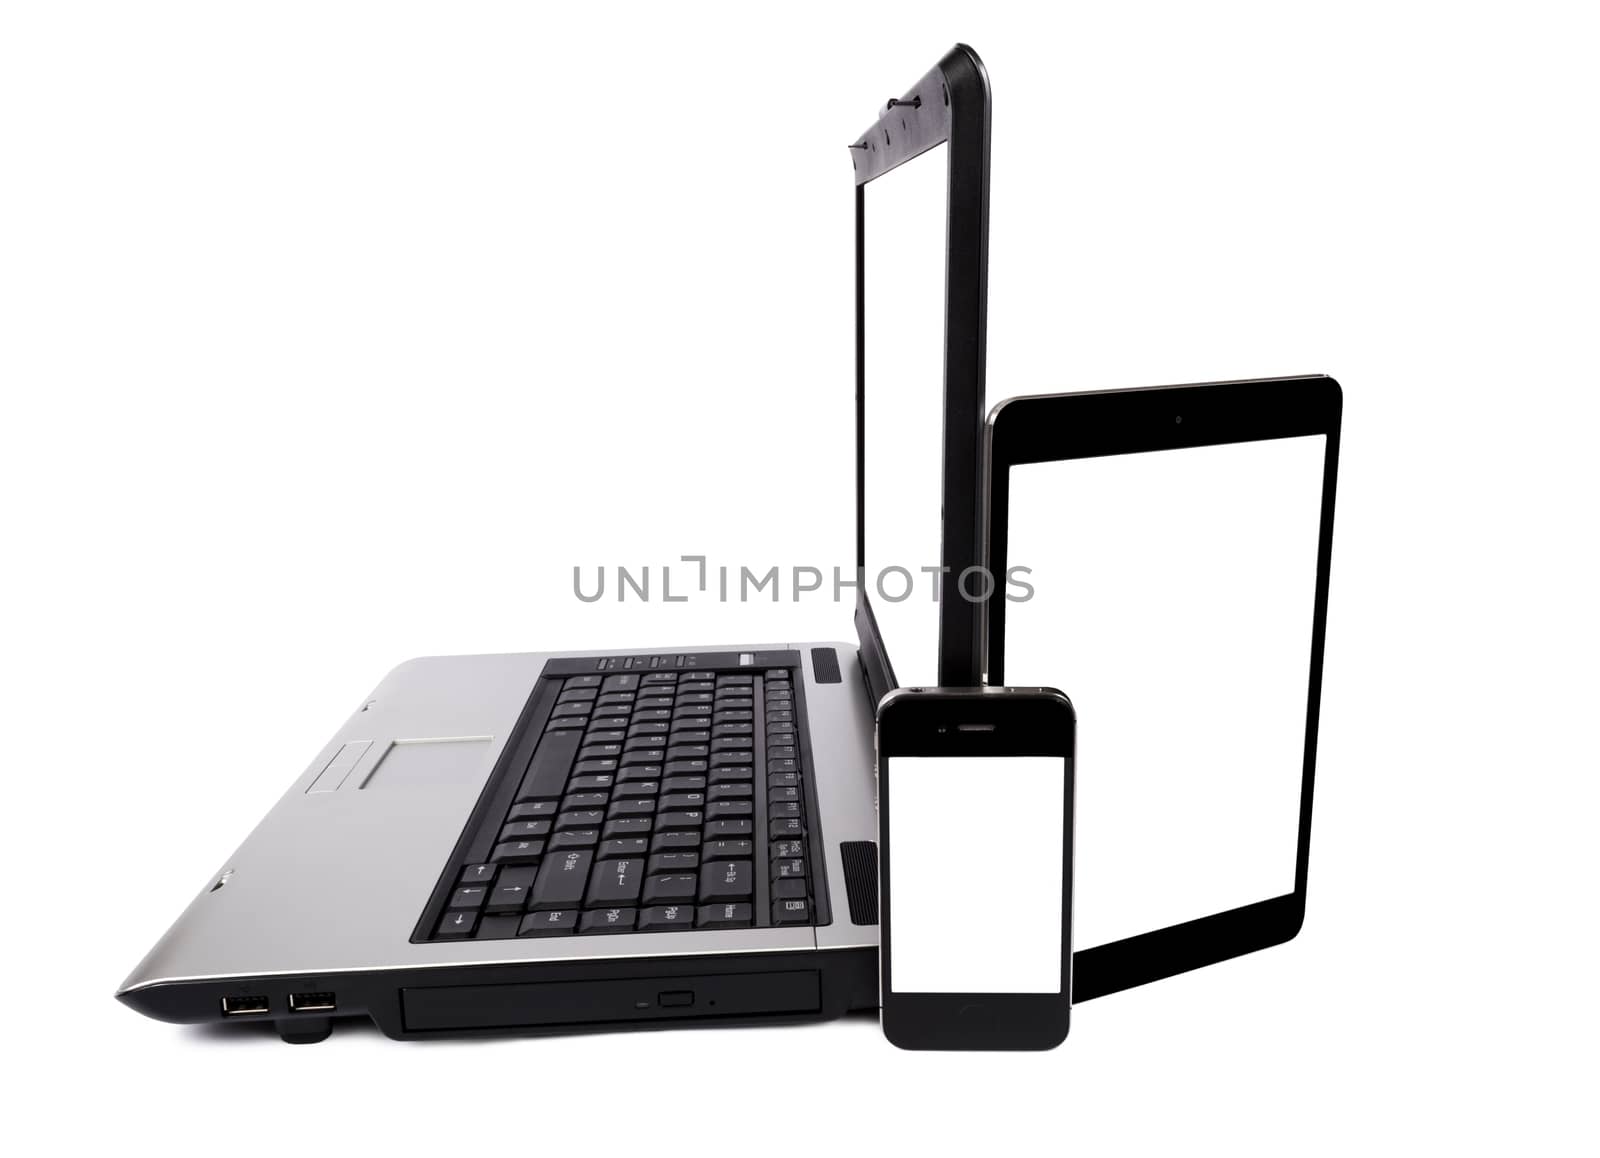 Laptop, Tablet and Mobile Phone Combo by stockbuster1